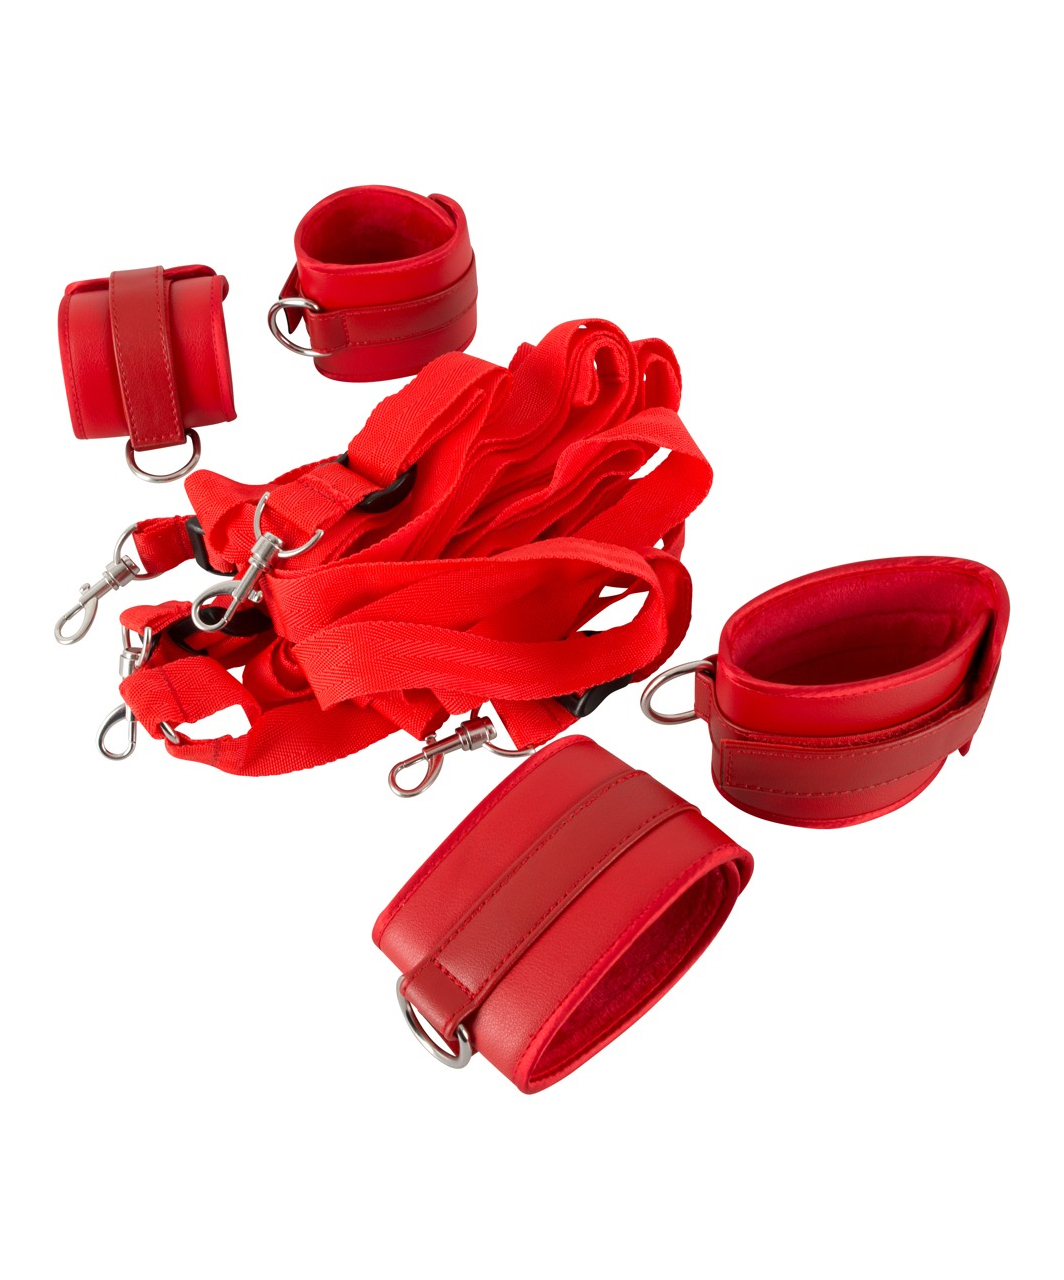 Bad Kitty red bed restraints